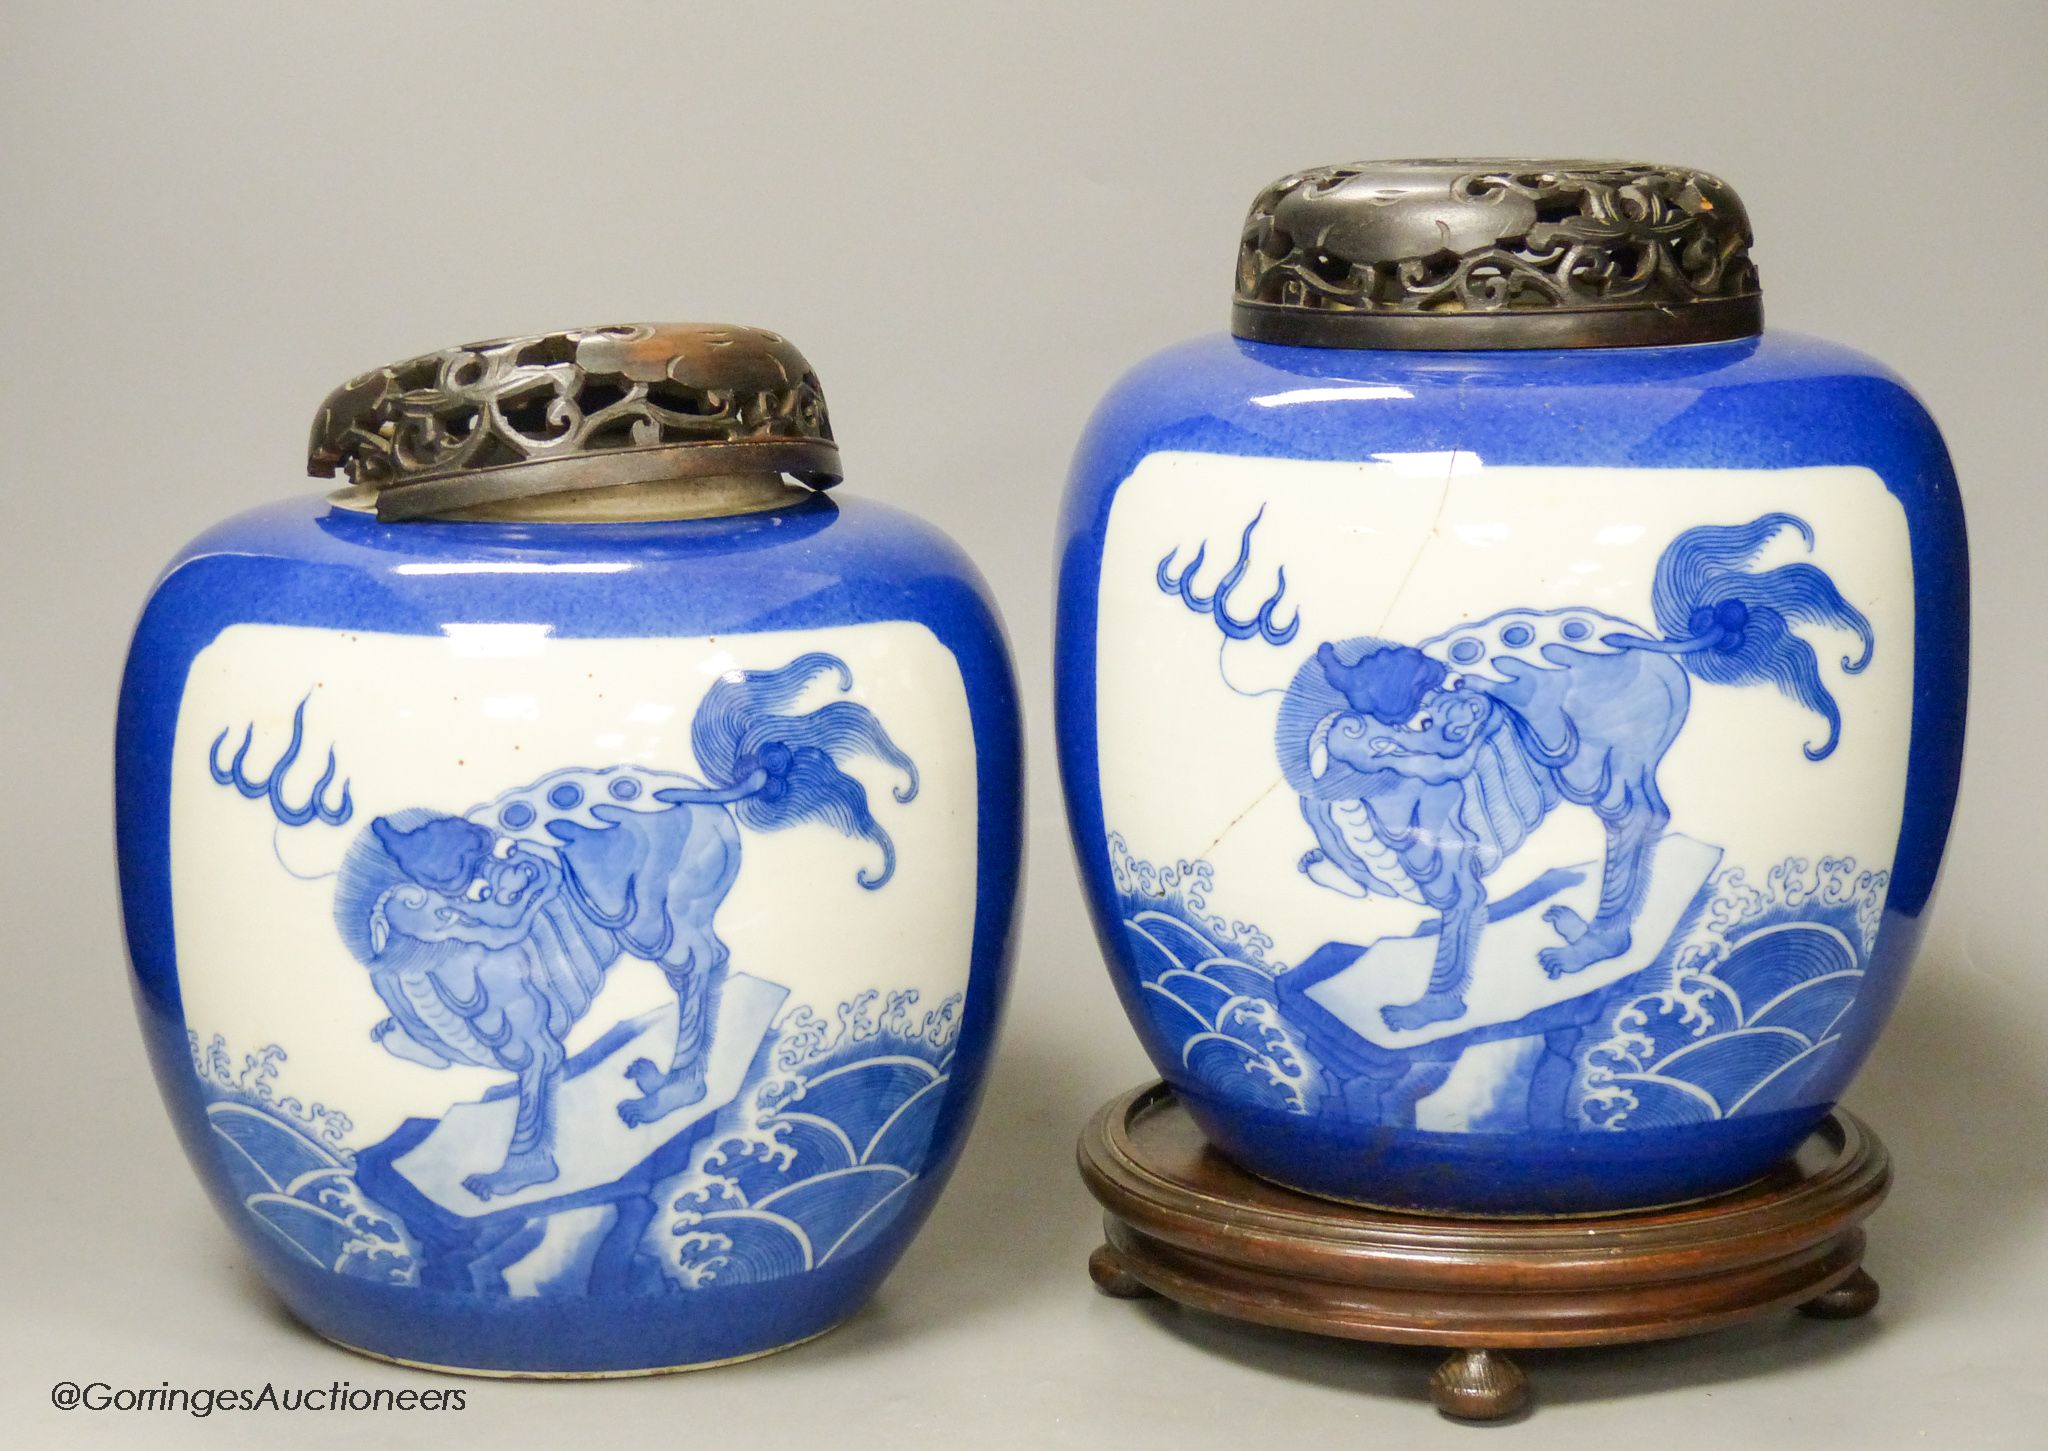 A pair of 19th century Chinese blue and white 'mythical beast' jars